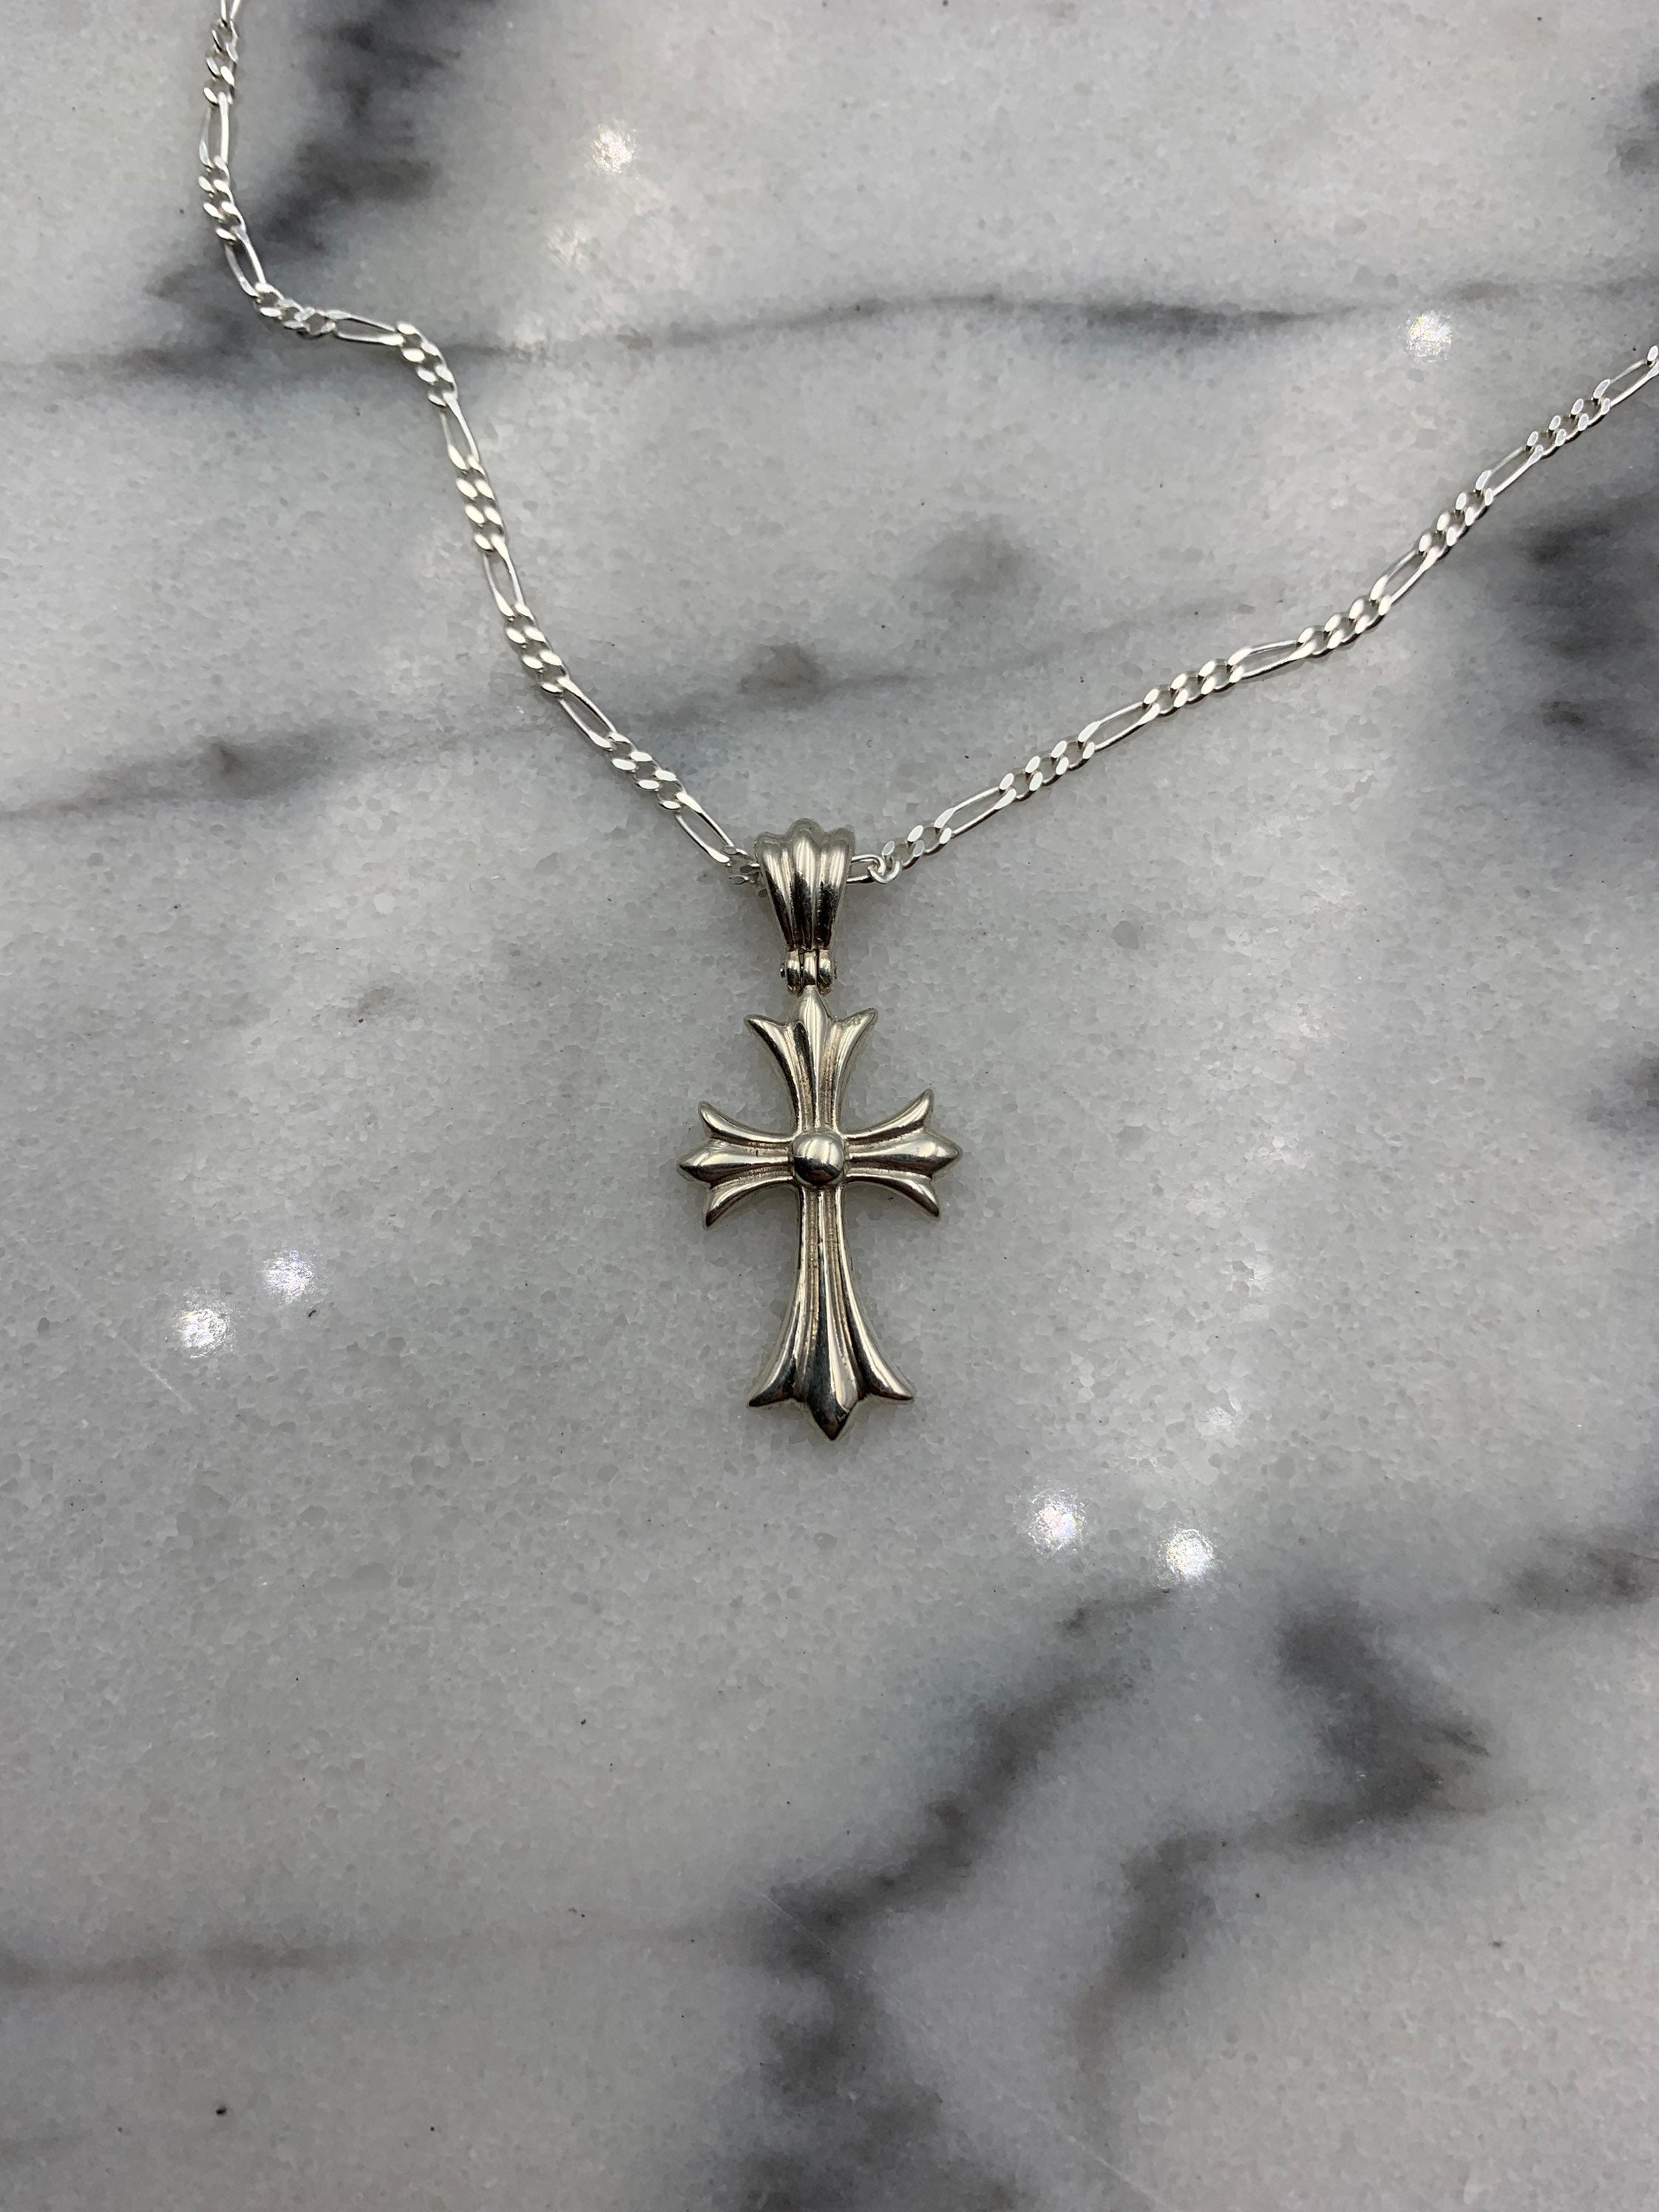 Chrome Hearts Inspired Cross Necklace Pendant Chain In Silver Etsy